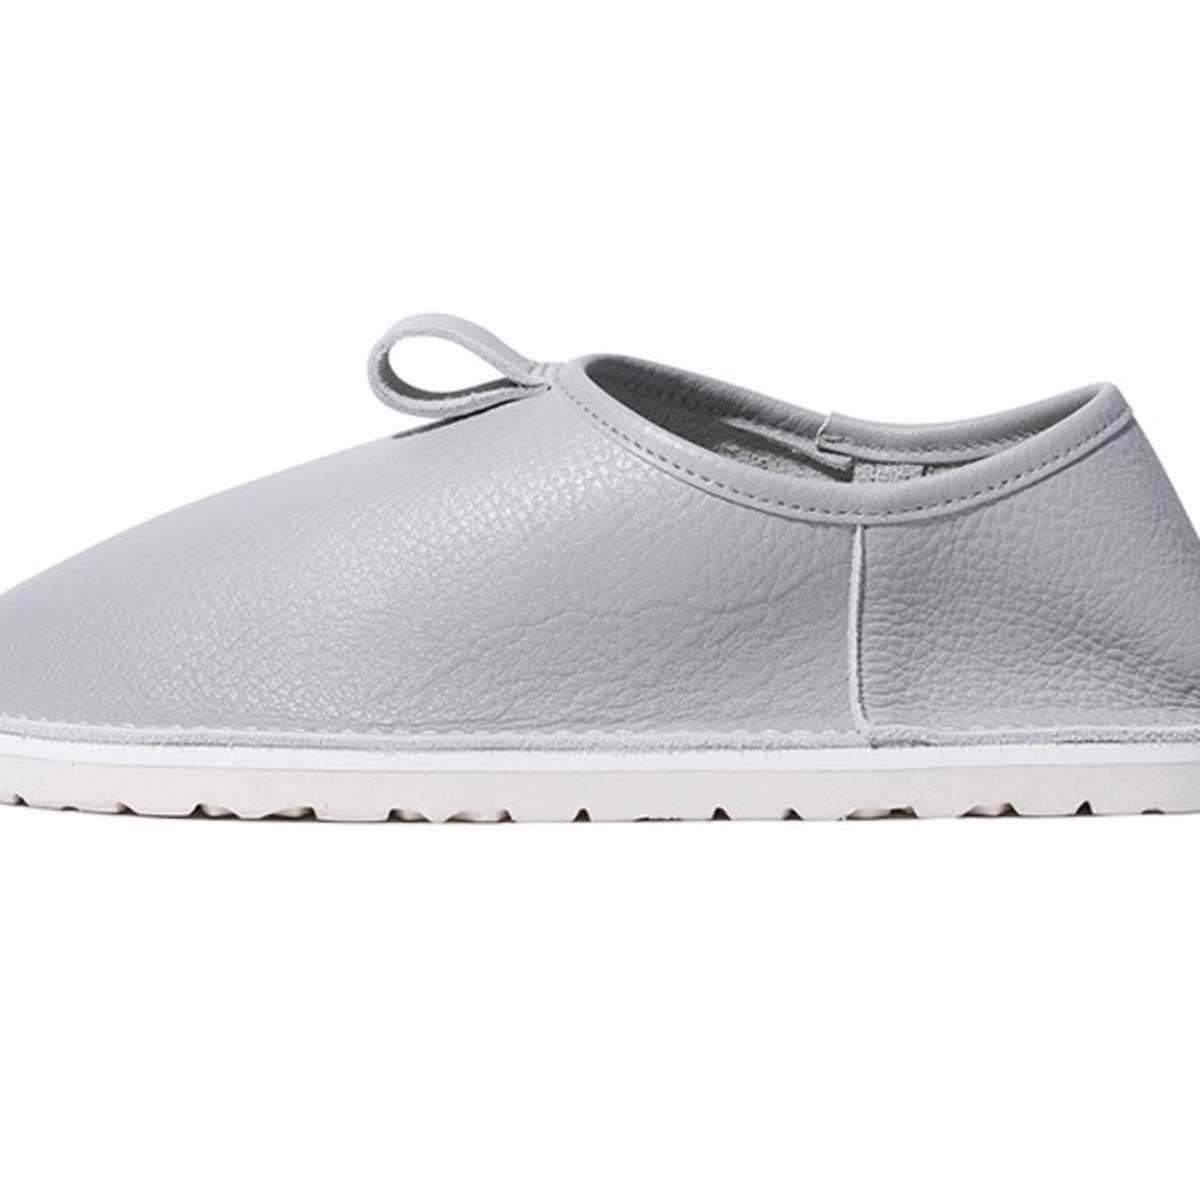 Snow Peak's Relaxin' Babouche Sandal is the perfect WFH shoe 